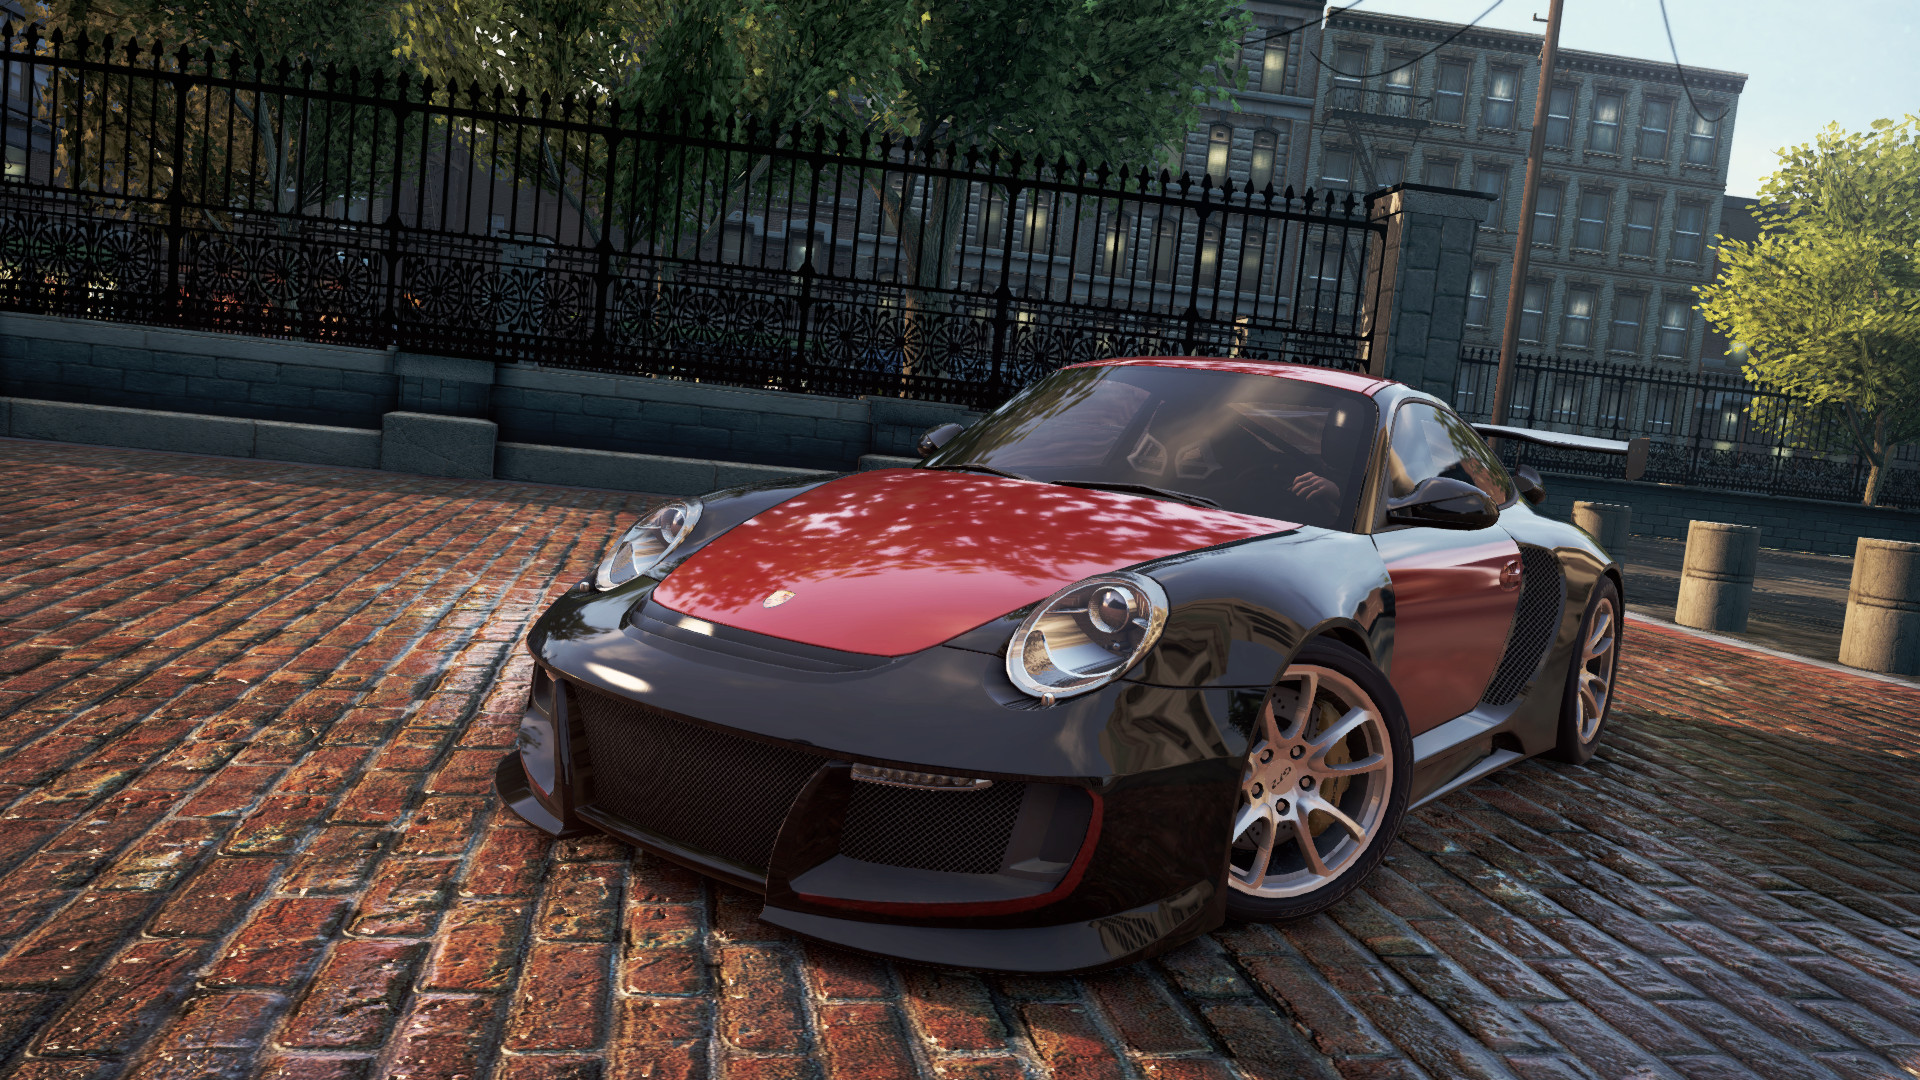 Need For Speed Most Wanted 2012 NFSMW12 - Widebody Rose's GT2 Improved Livery